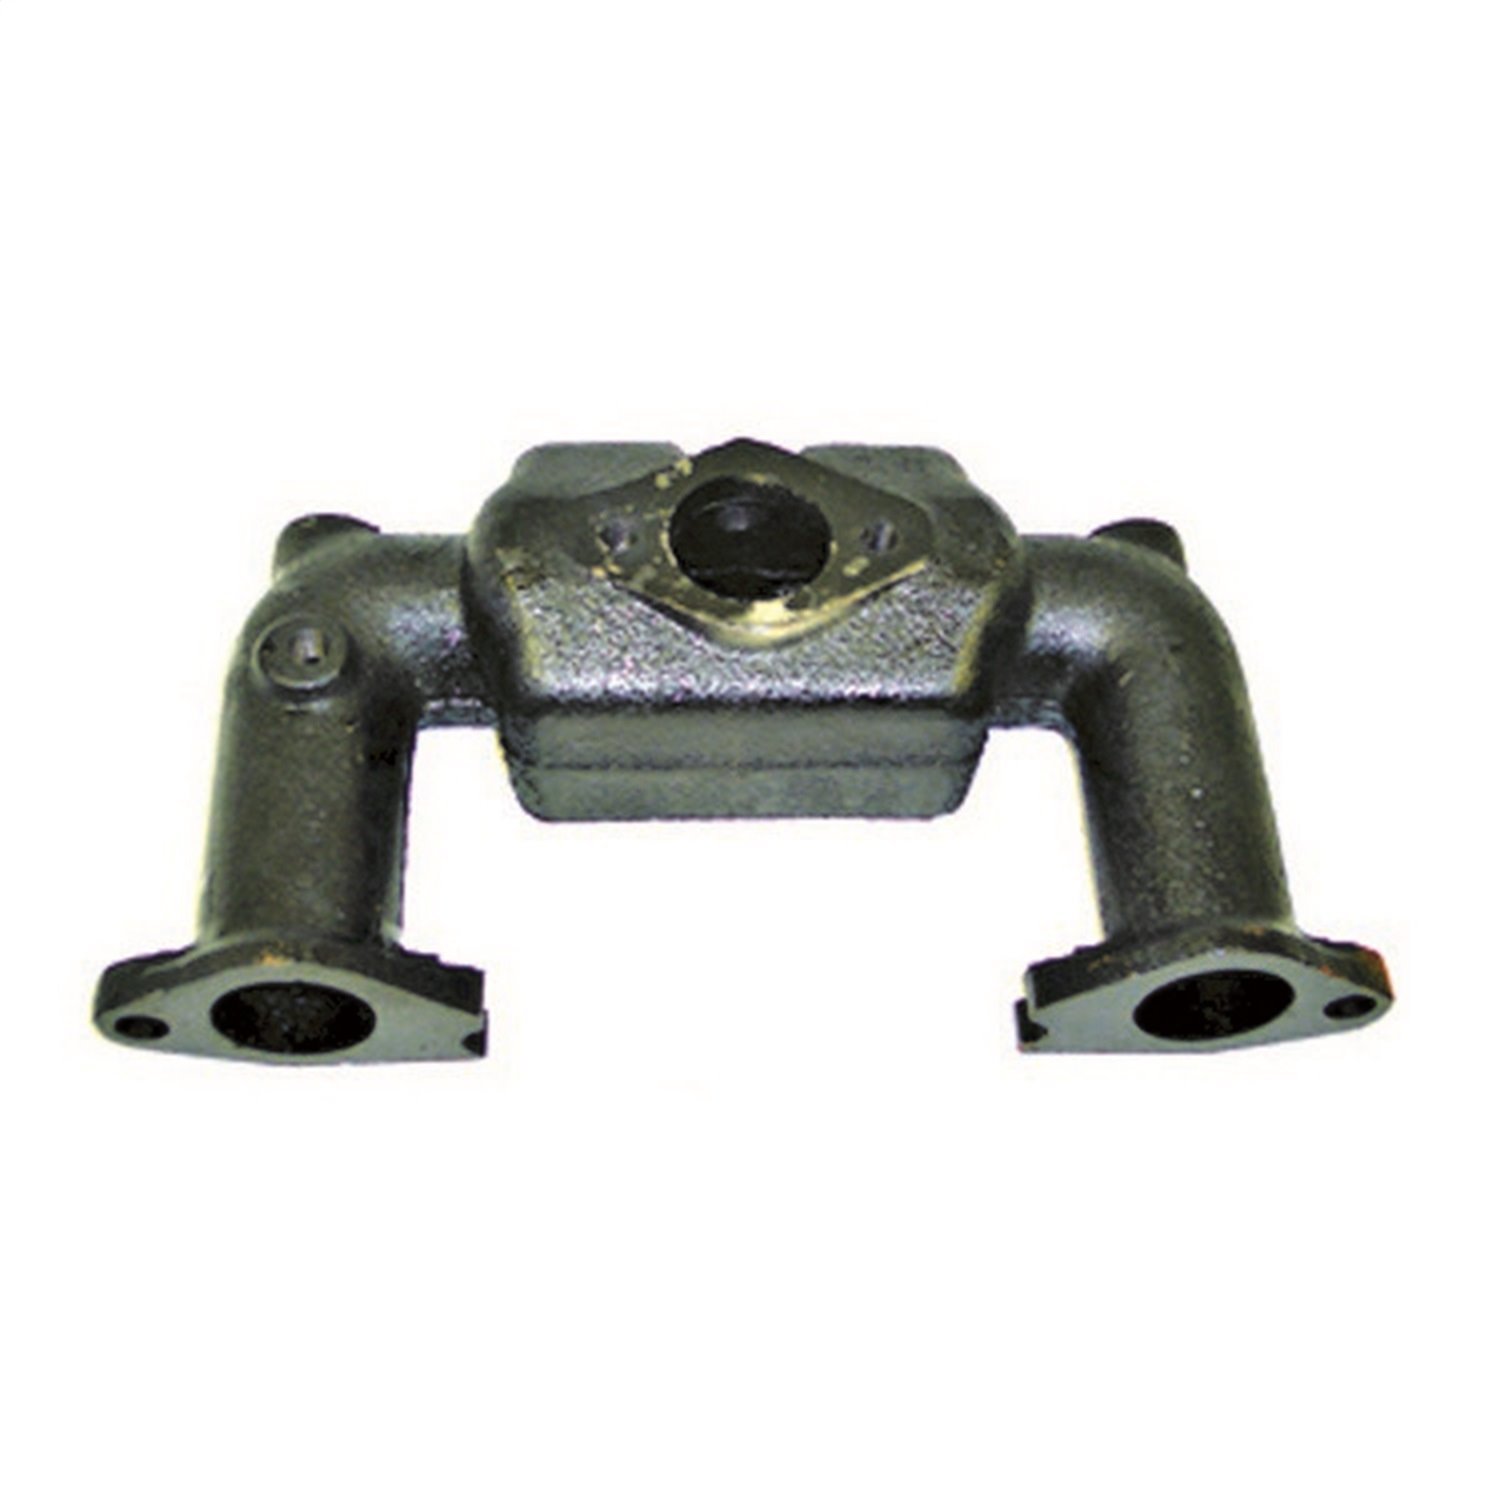 This intake manifold from Omix-ADA fits the 4-cylinder 134 L-head engines found in 41-45 Willys MBs/